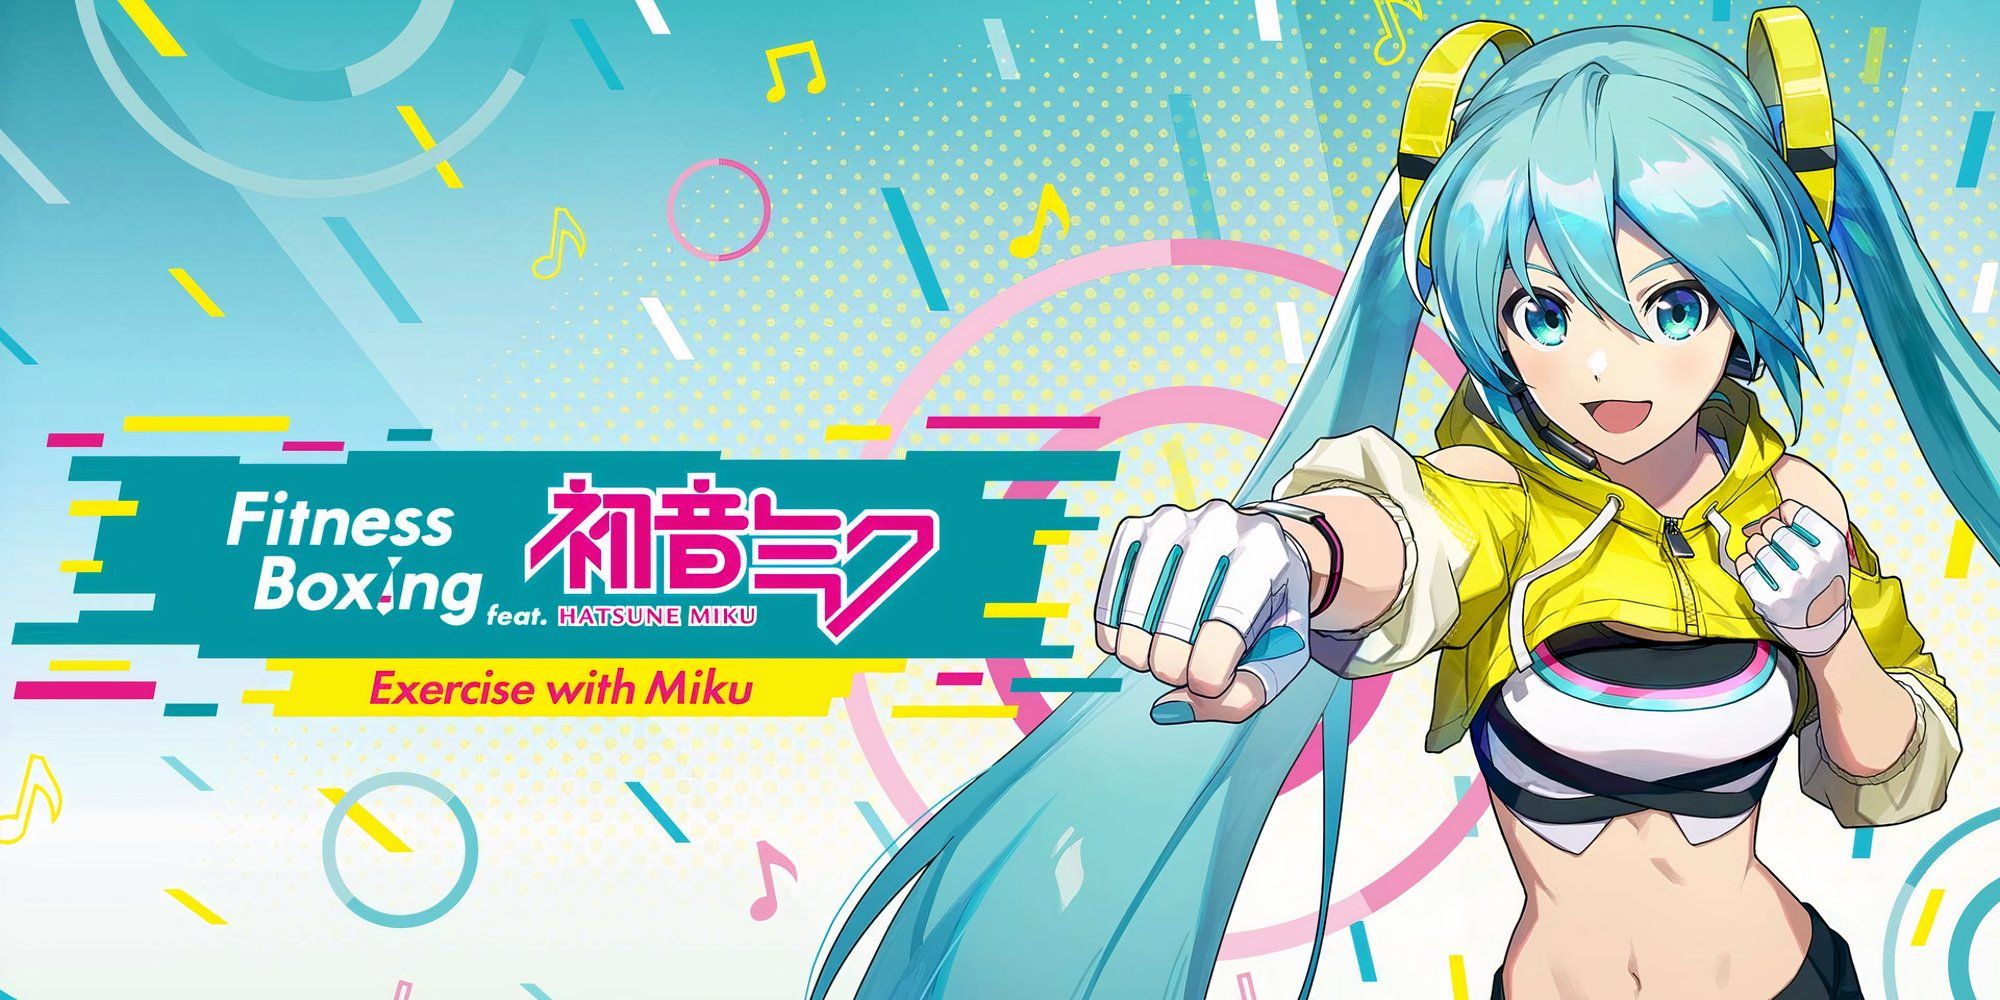 Fitness Boxing feat. Hatsune Miku English Release Date Confirmed